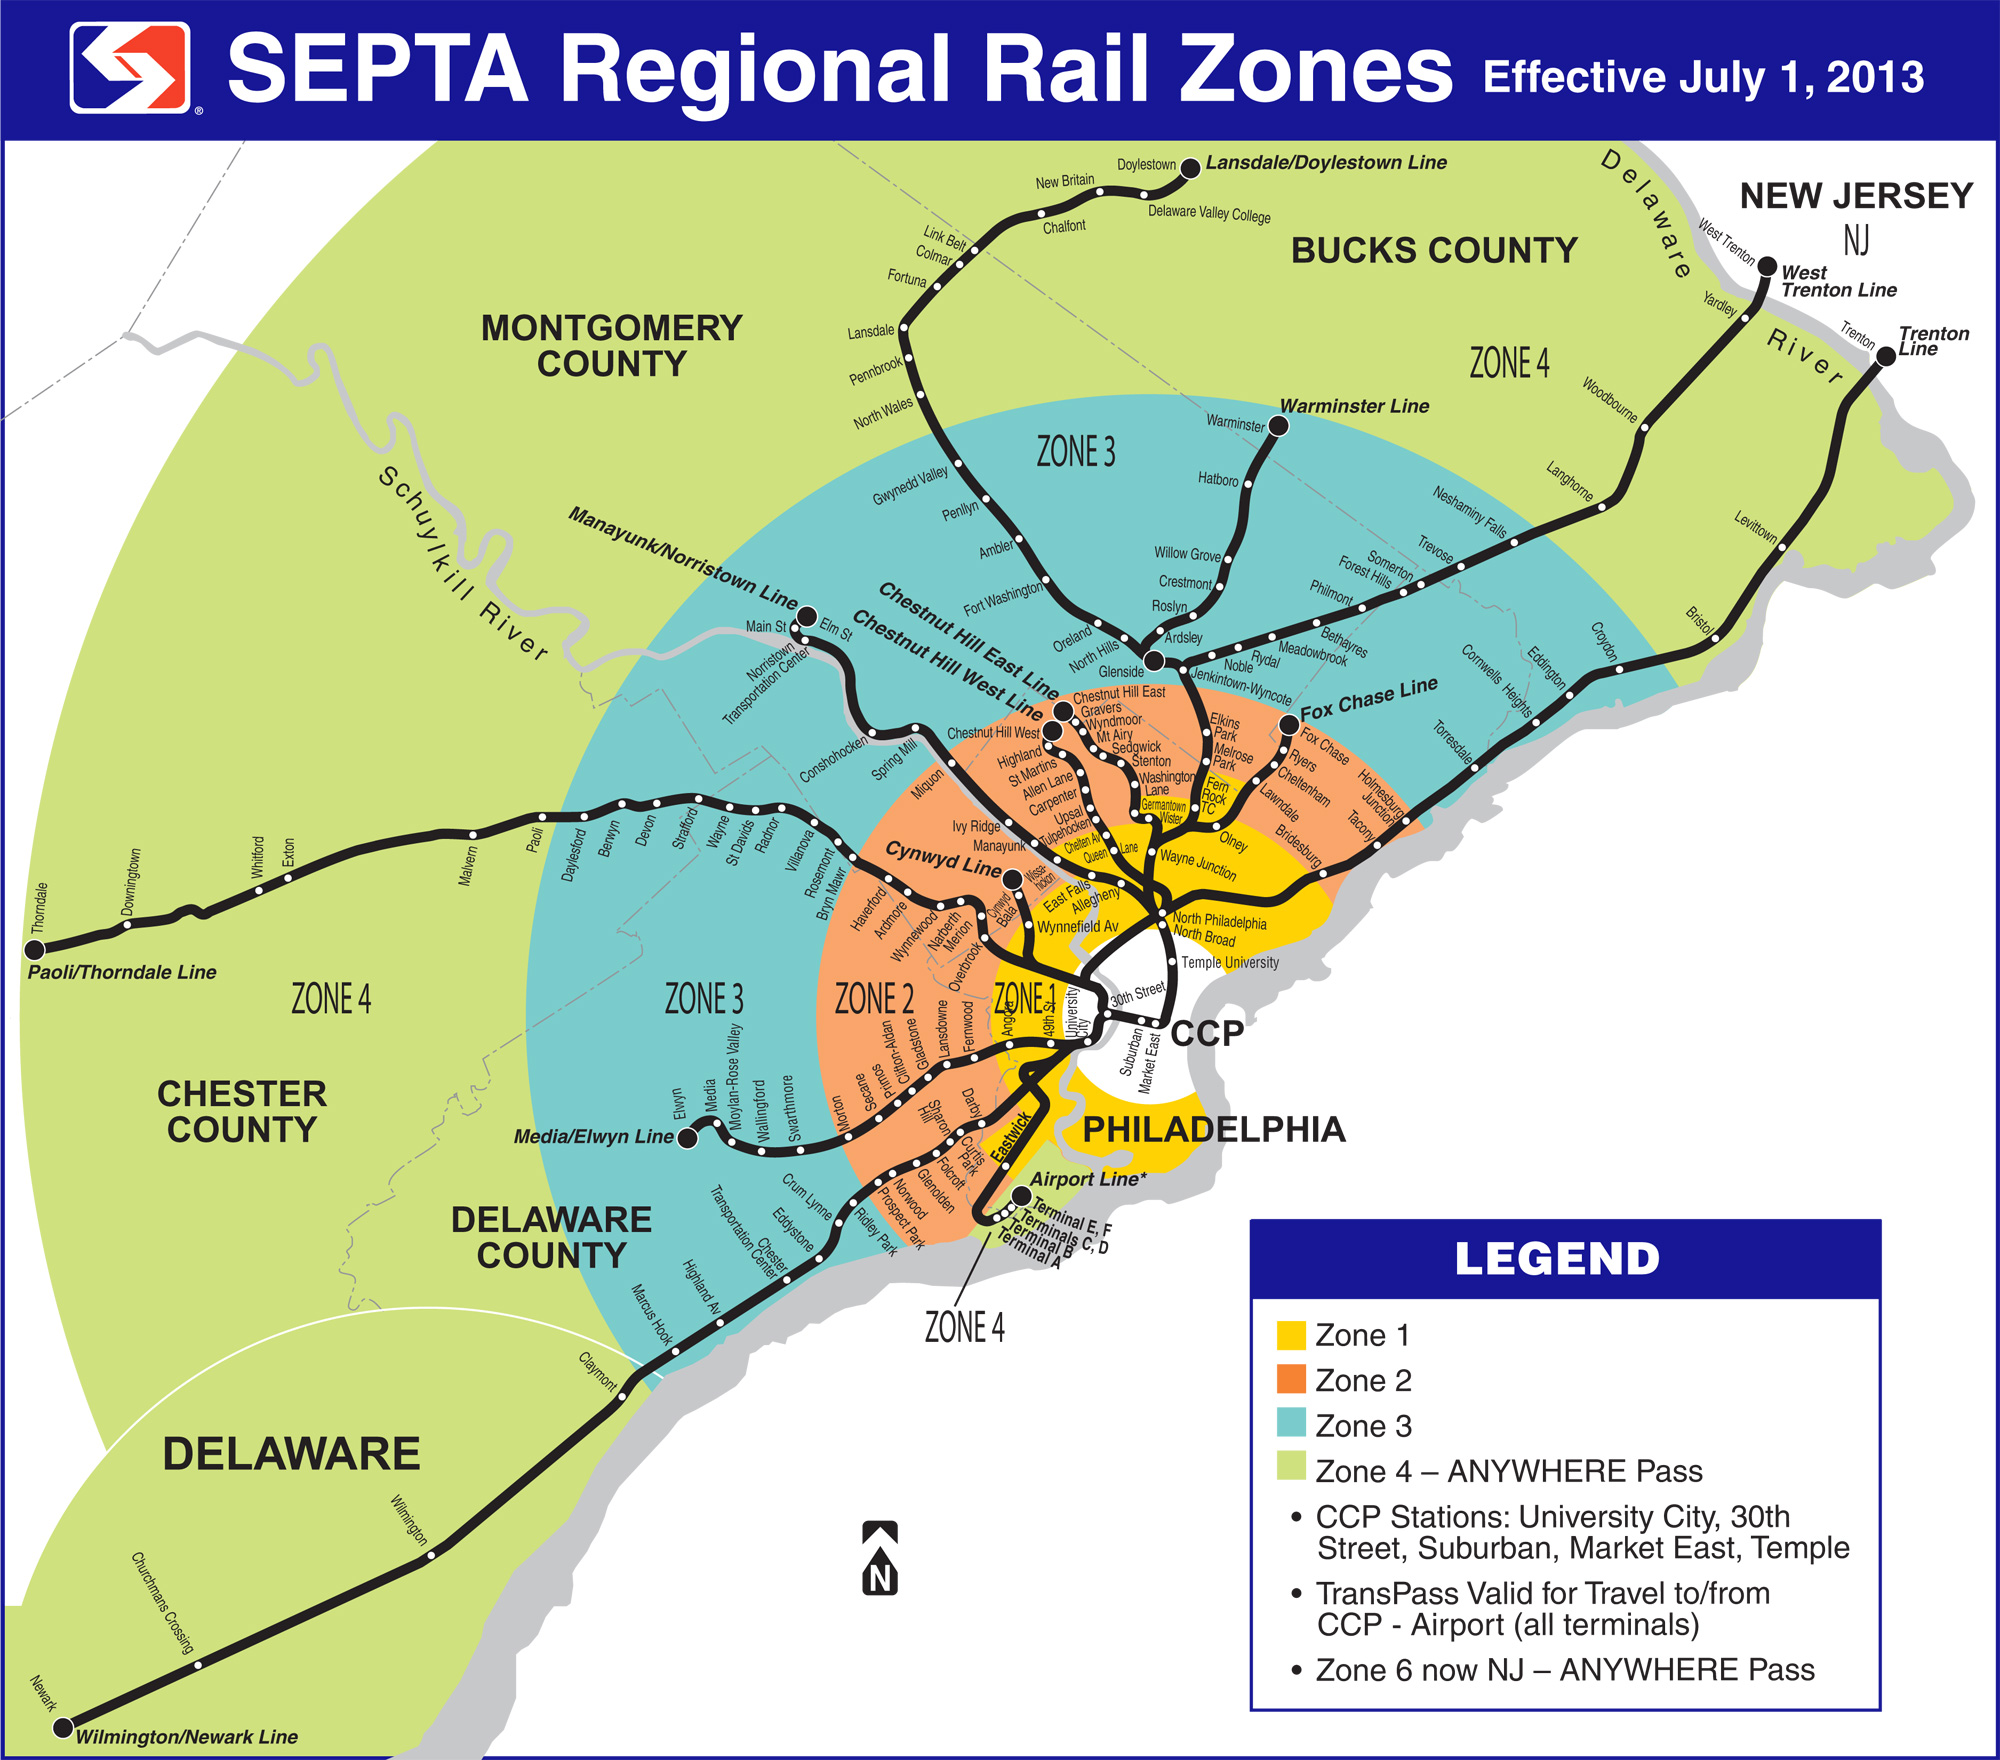 Proposed SEPTA Regional Rail systems and zones